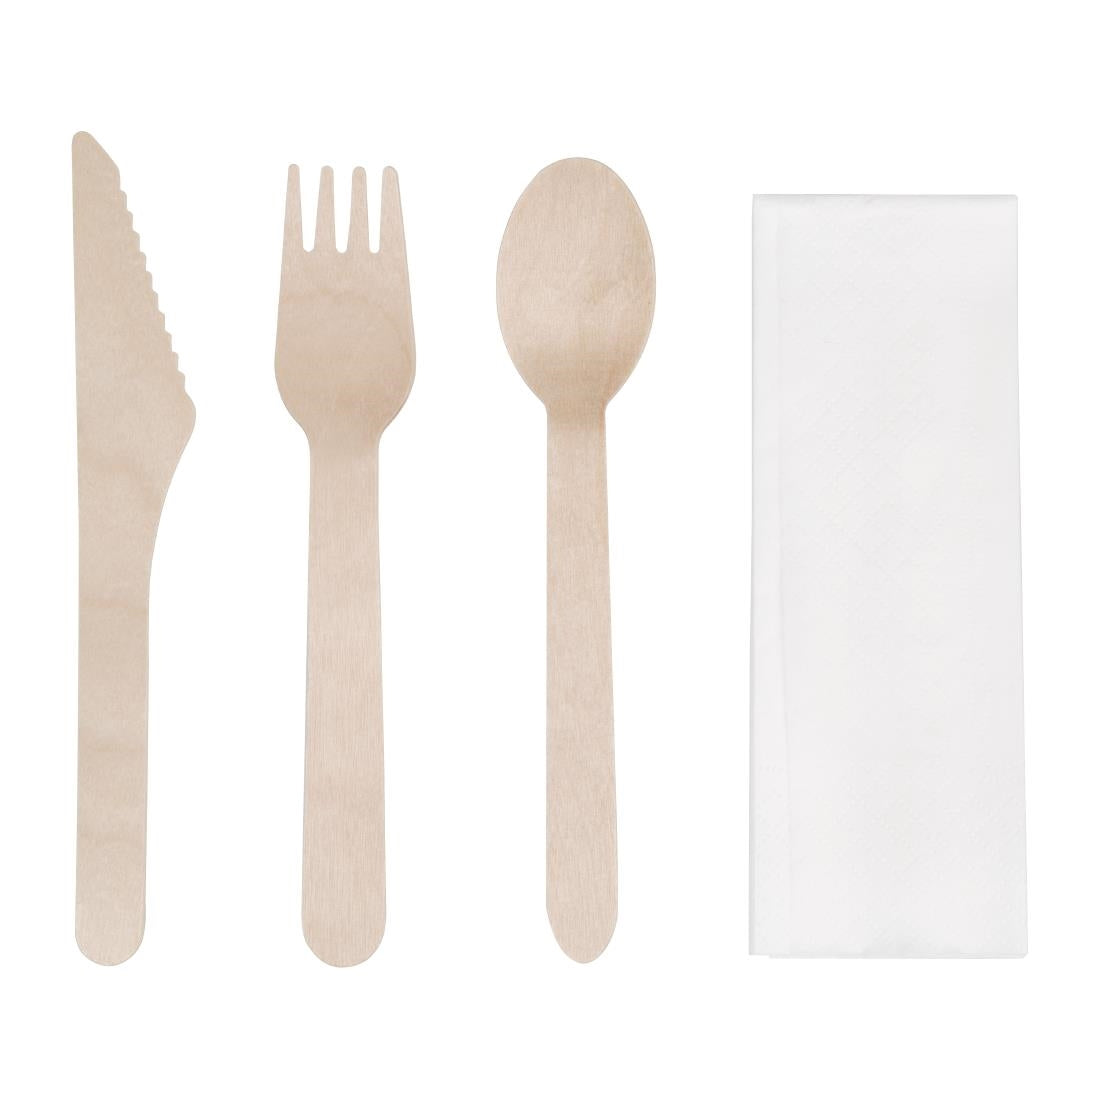 DF422 Fiesta Compostable Wooden Cutlery Meal Pack (Pack of 250) JD Catering Equipment Solutions Ltd